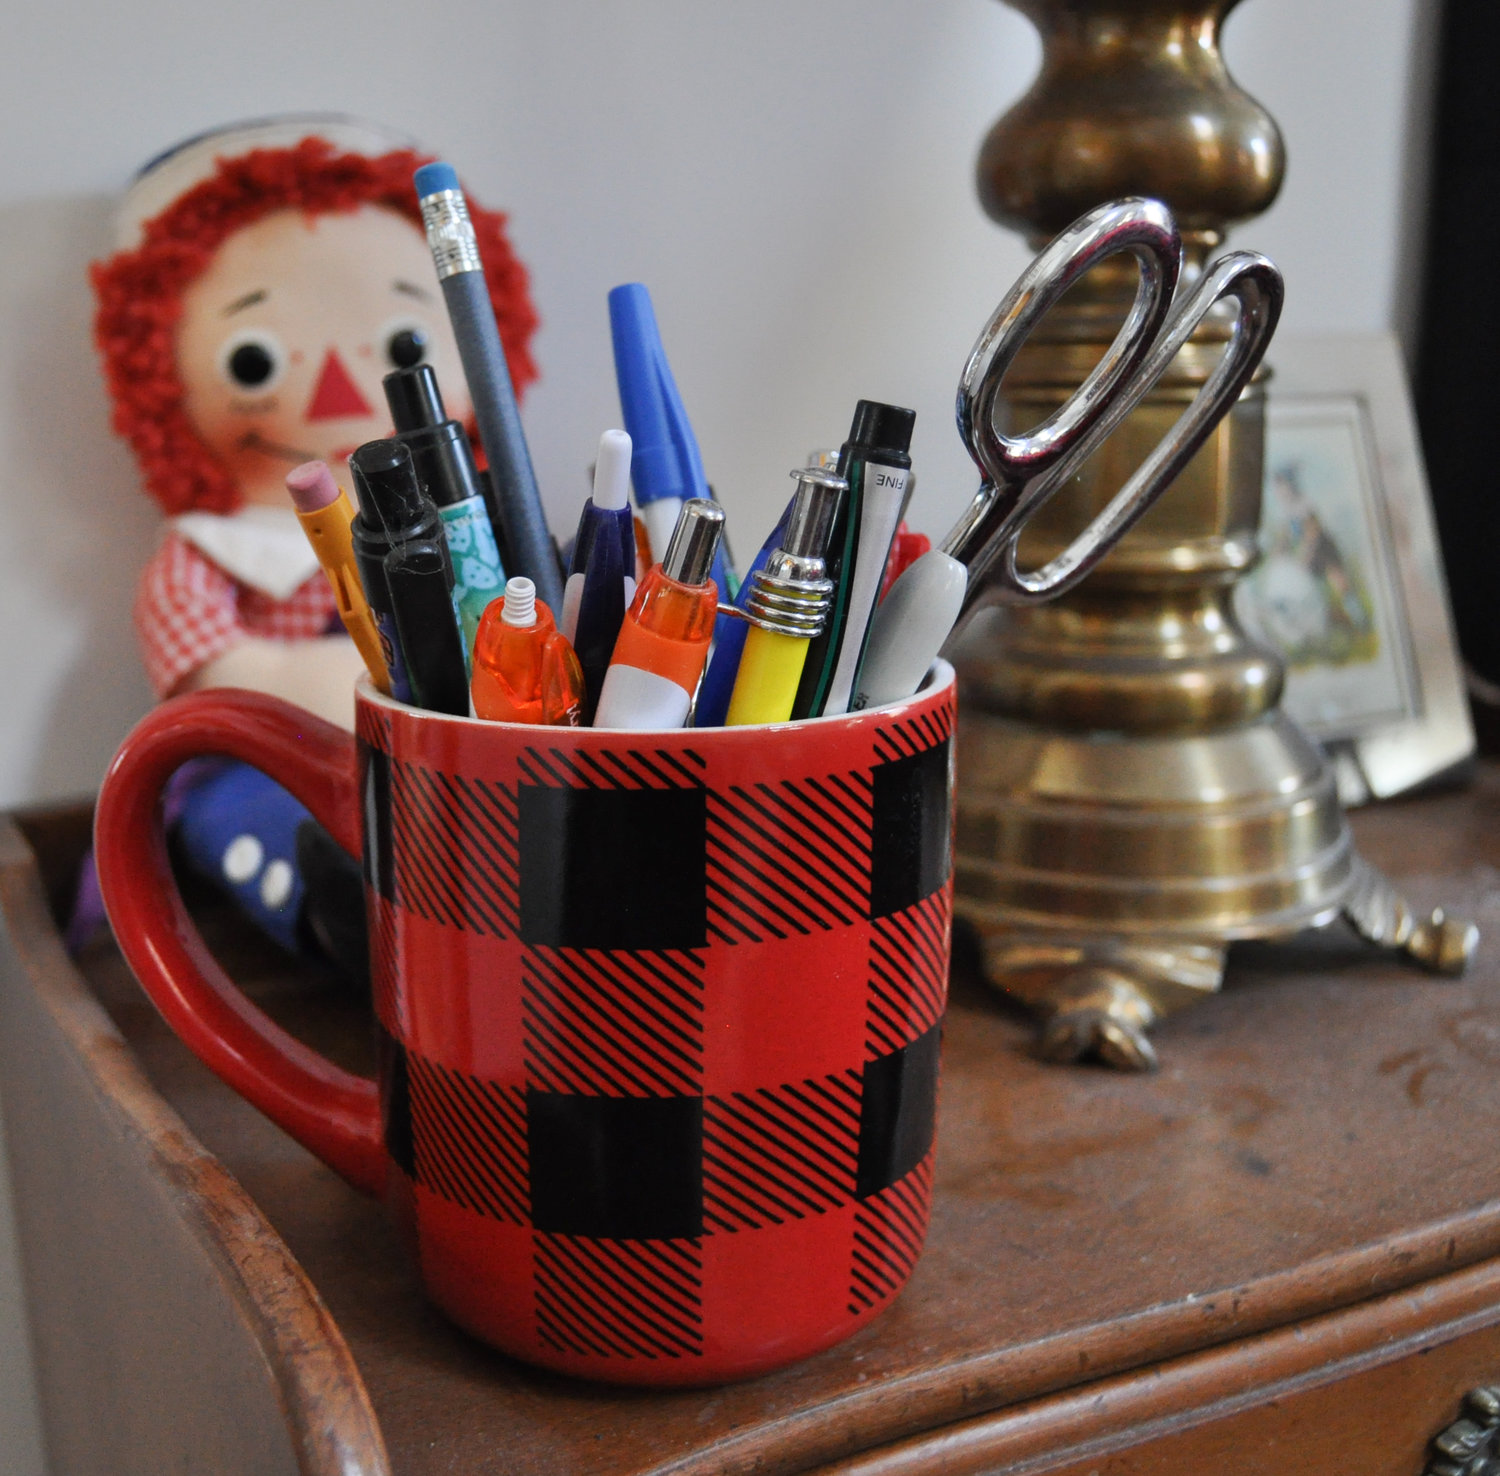 Fair warning, next week's column might be about pens and pencils. Or buffalo plaid. Or both...